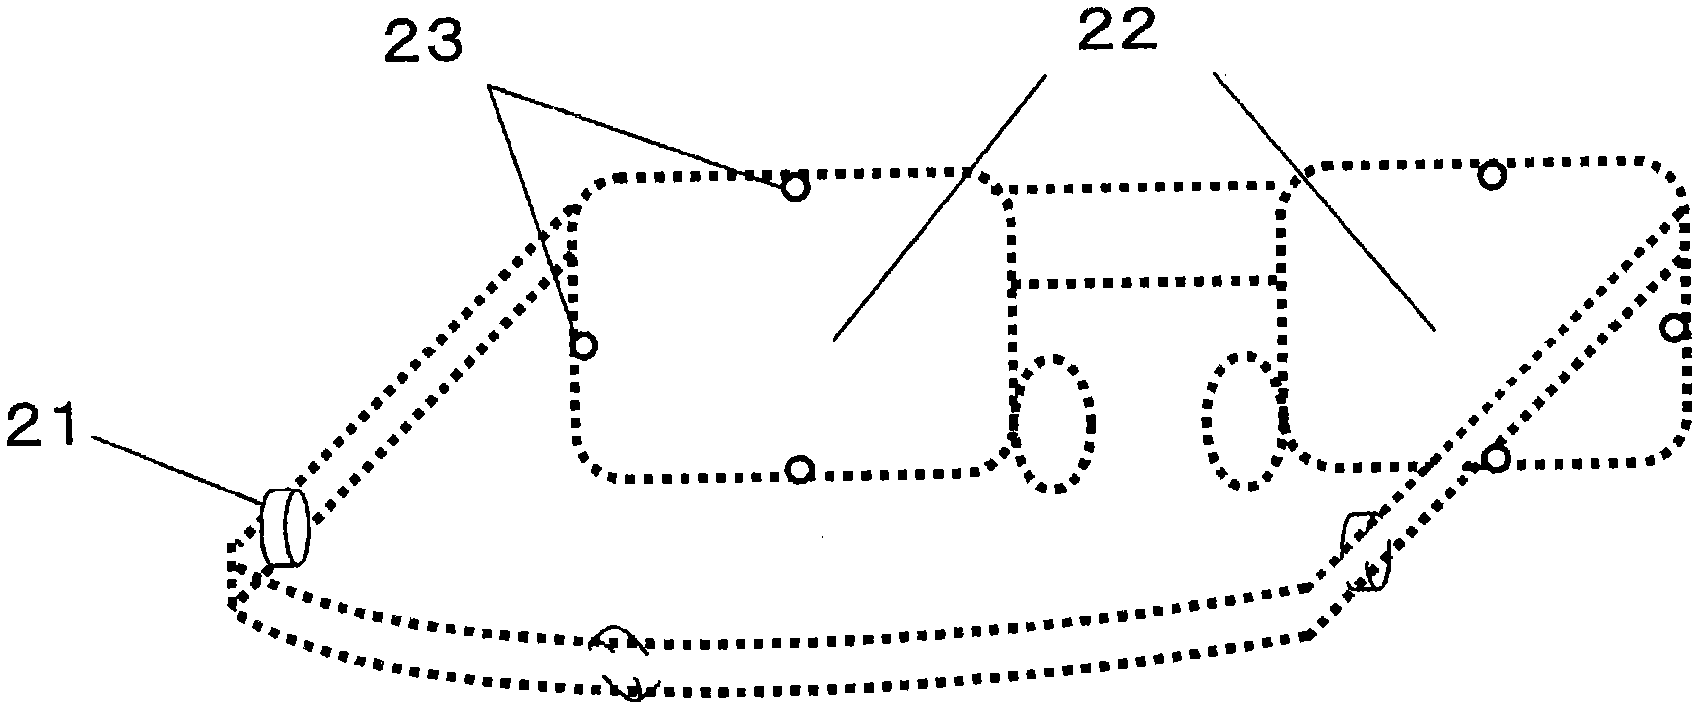 Driver awareness degree judgment device, method, and program